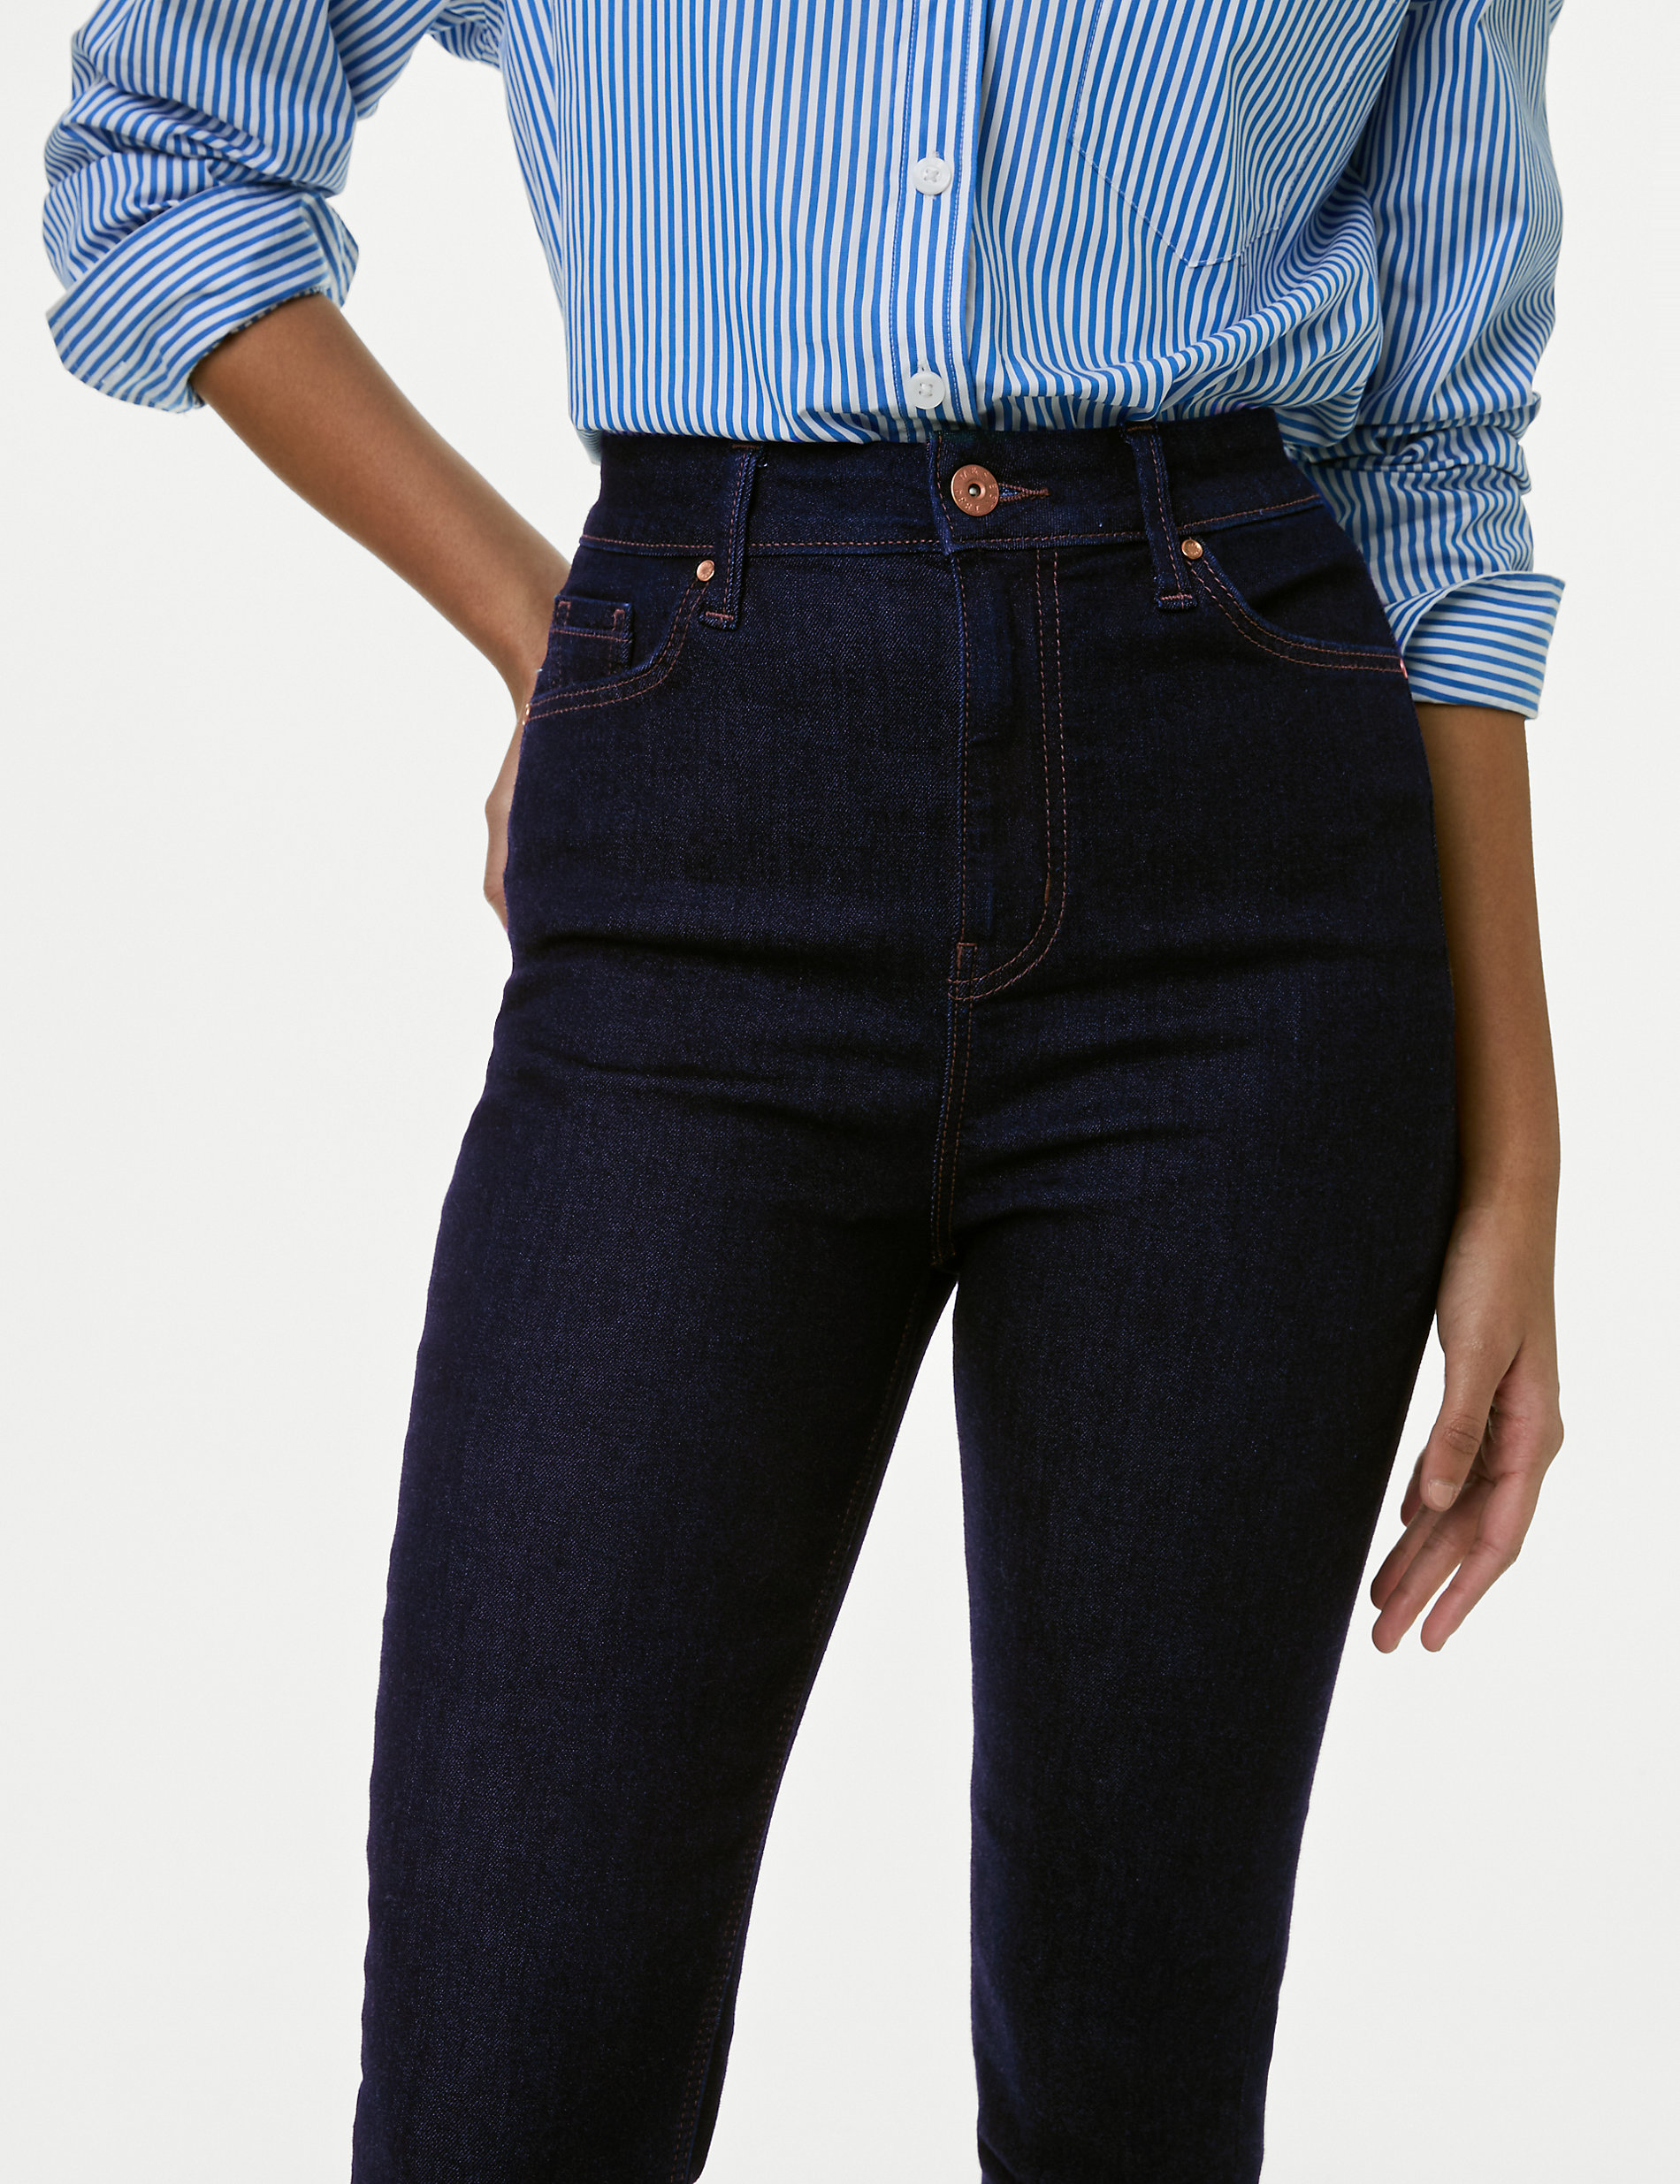 Ivy Supersoft High Waisted Skinny Jeans Marks & Spencer Women Clothing Jeans High Waisted Jeans 